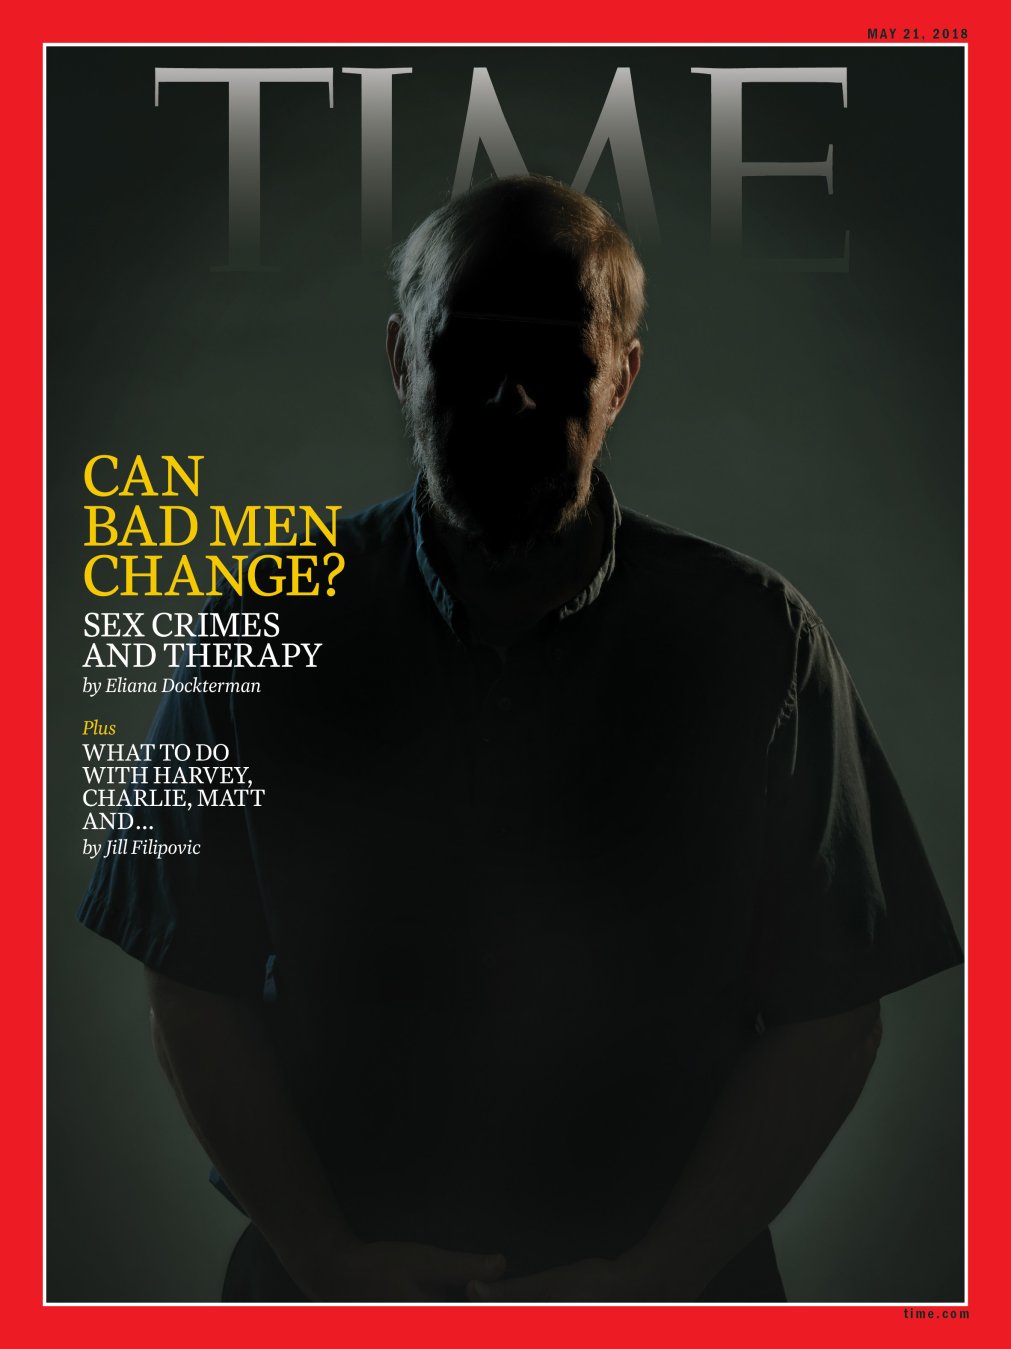 Happy Birthday Sex Video Rep - Can Bad Men Change? What It's Like Inside Sex Offender Therapy | TIME